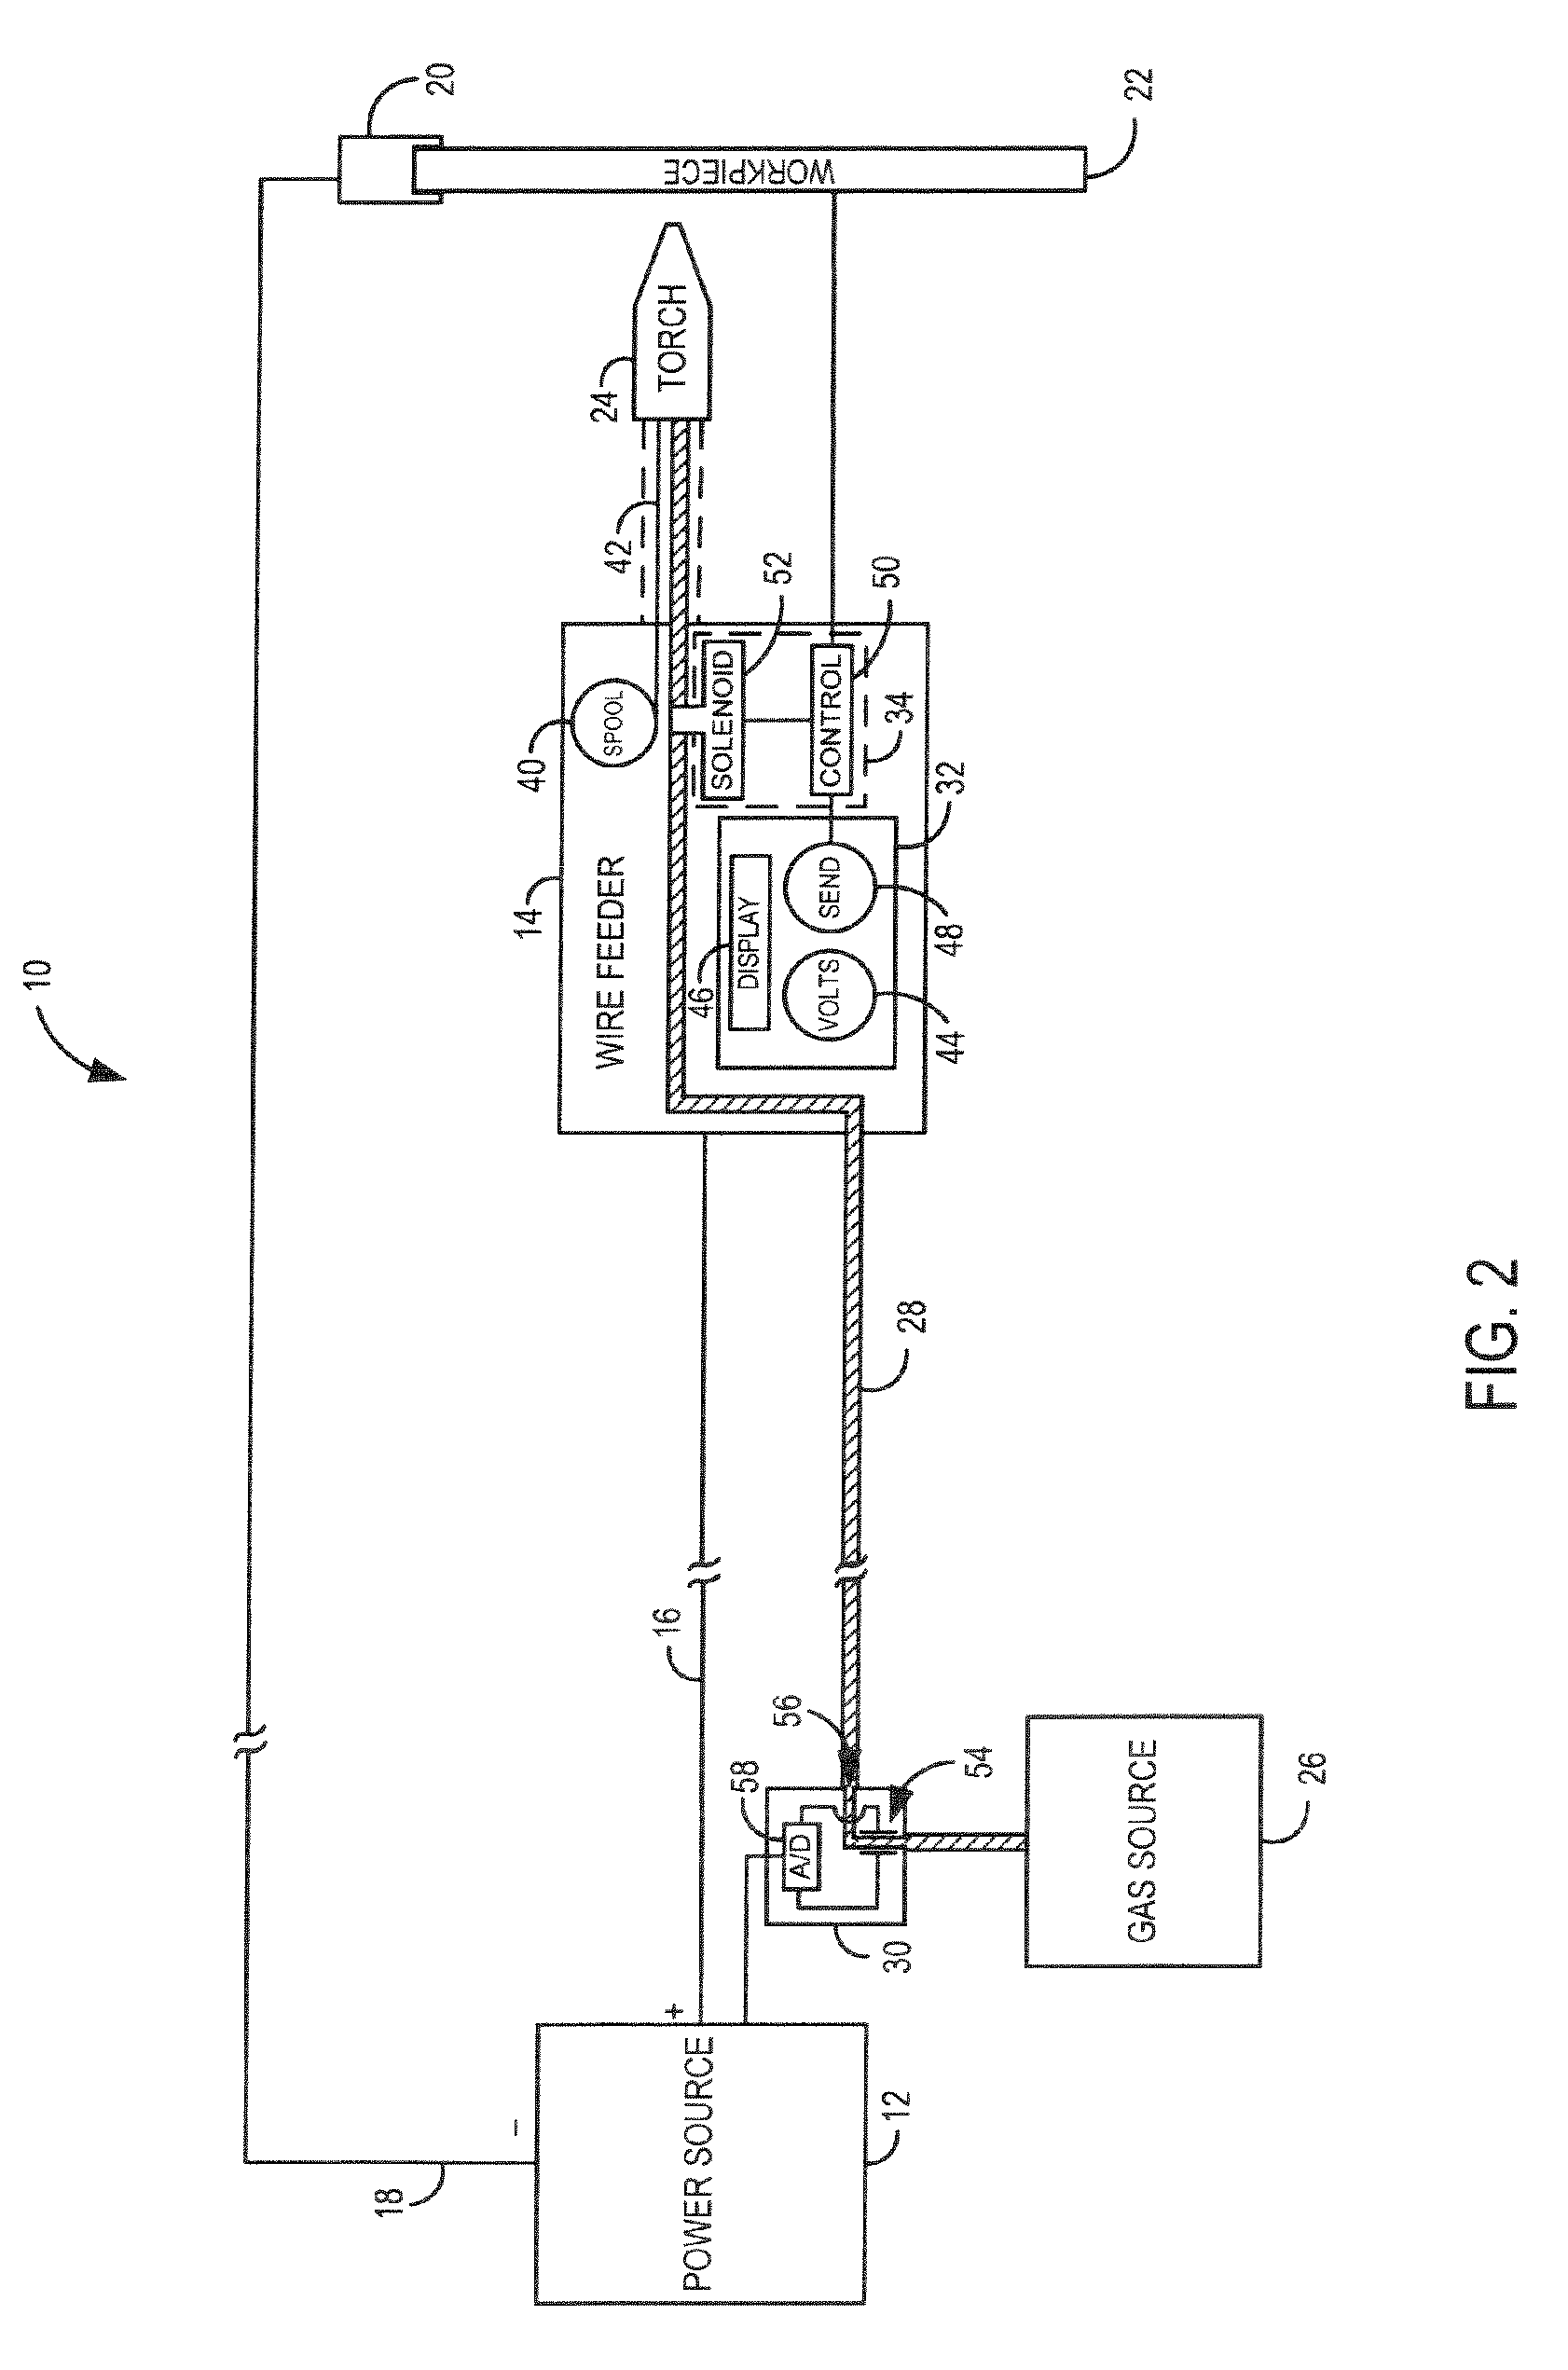 System and method for data communications over a gas hose in a welding-type application